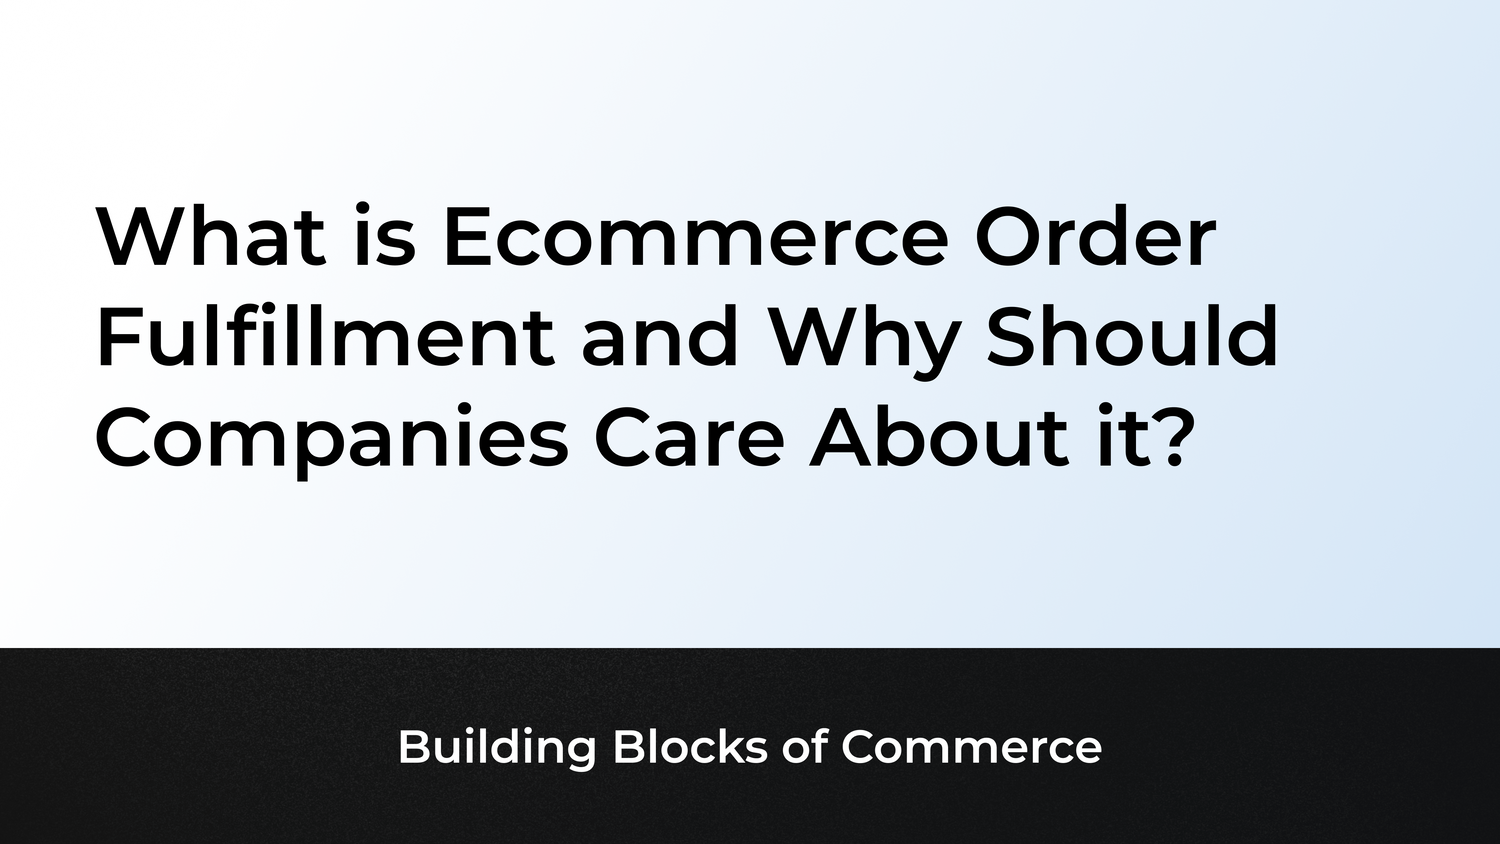 What is Ecommerce Order Fulfillment and Why Should Companies Care About it?